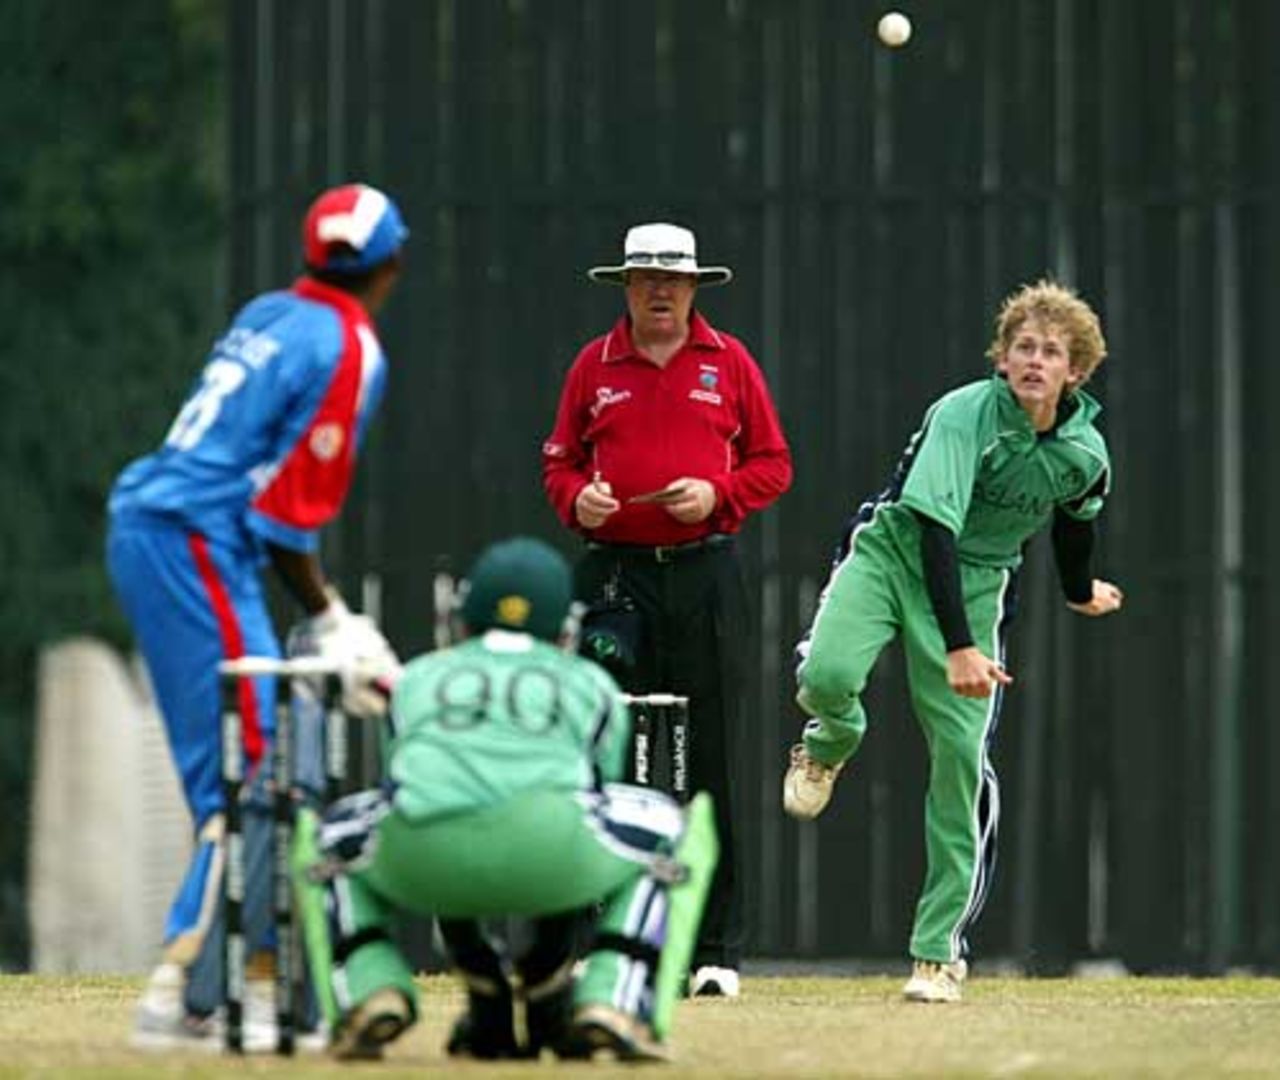 Ben Ackland produced a tight spell with his offspin, Bermuda U-19 v Ireland U-19, Under-19 World Cup, Malaysia, February 21, 2008